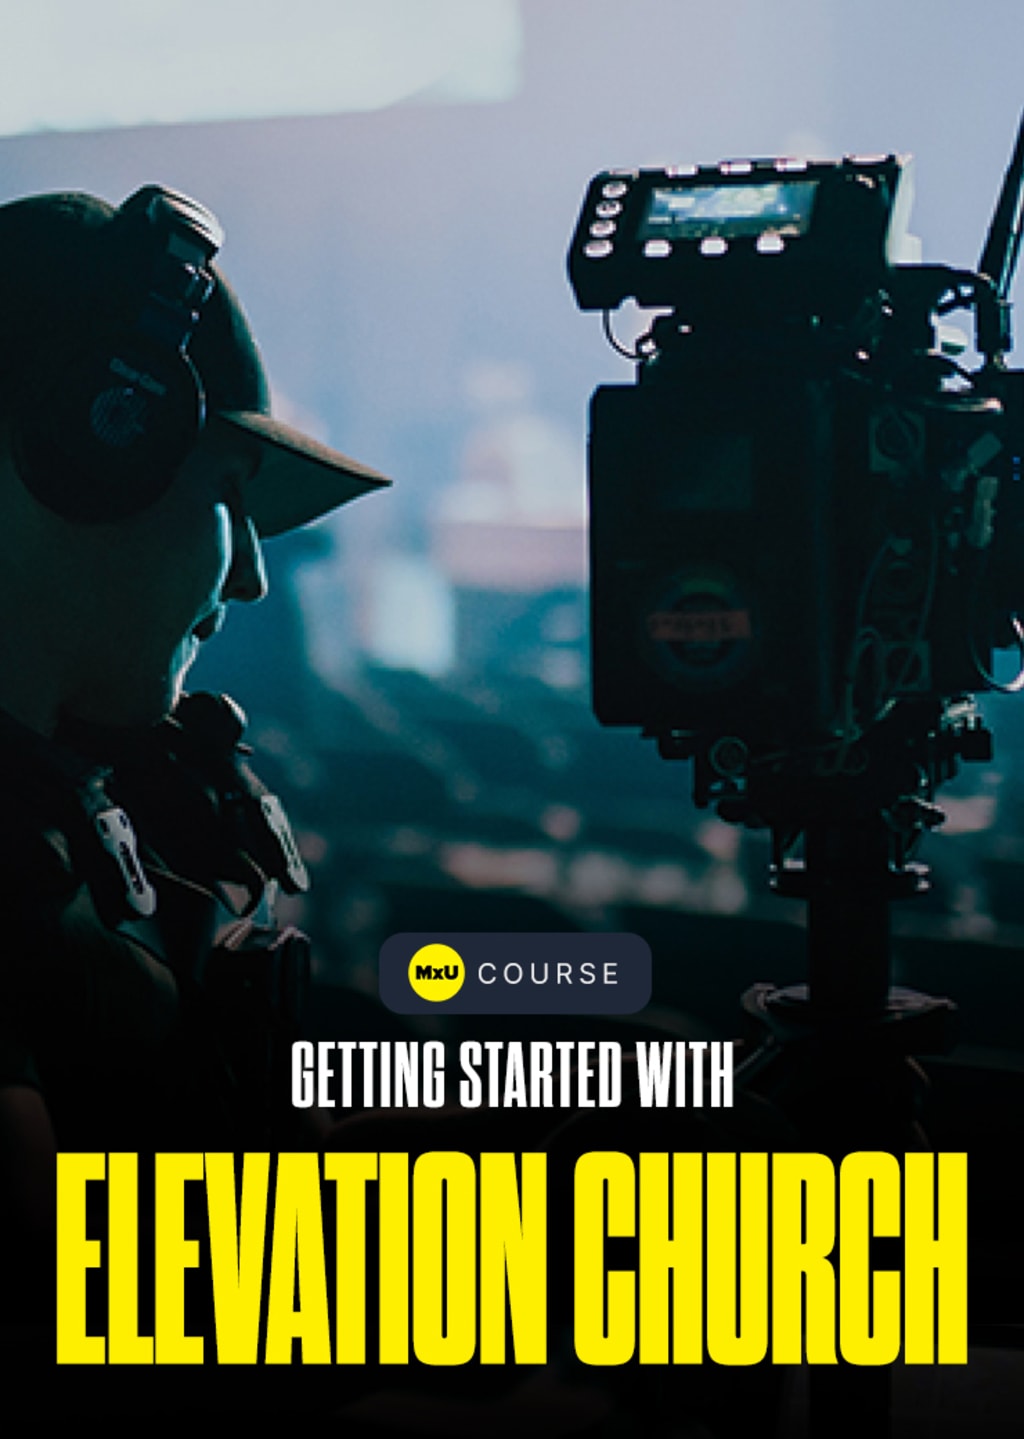 Getting Started with Elevation Church